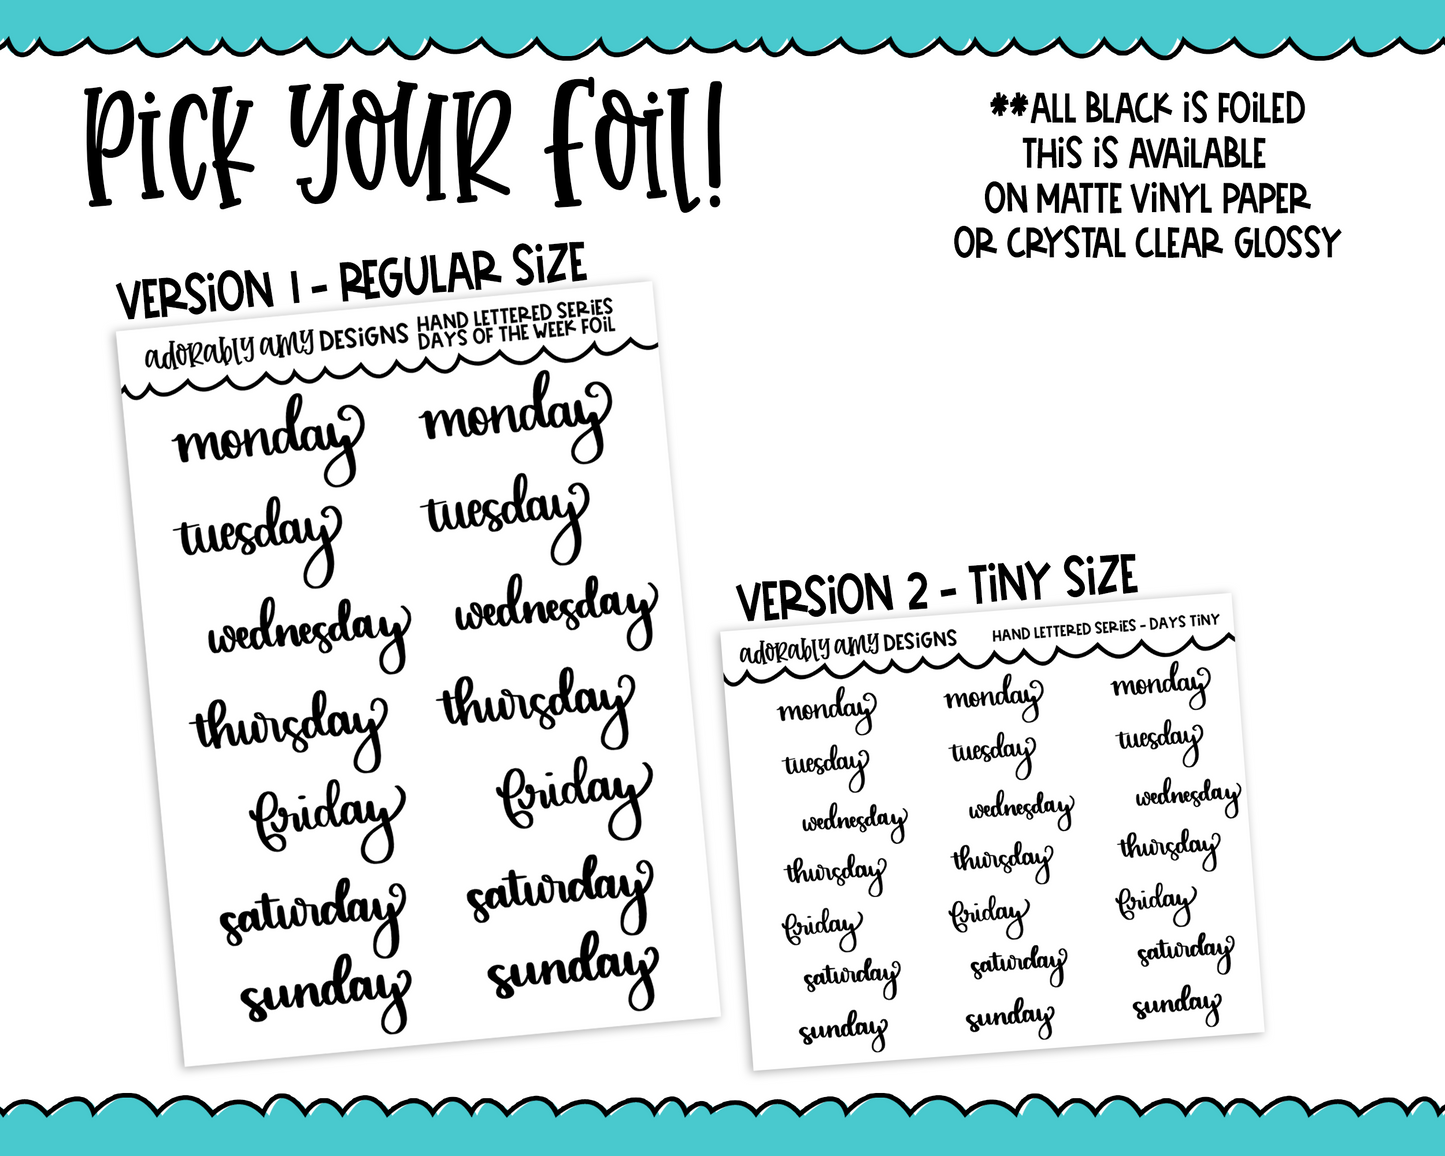 Foiled Hand Lettered Days of the Week Planner Stickers for any Planner or Insert - Adorably Amy Designs